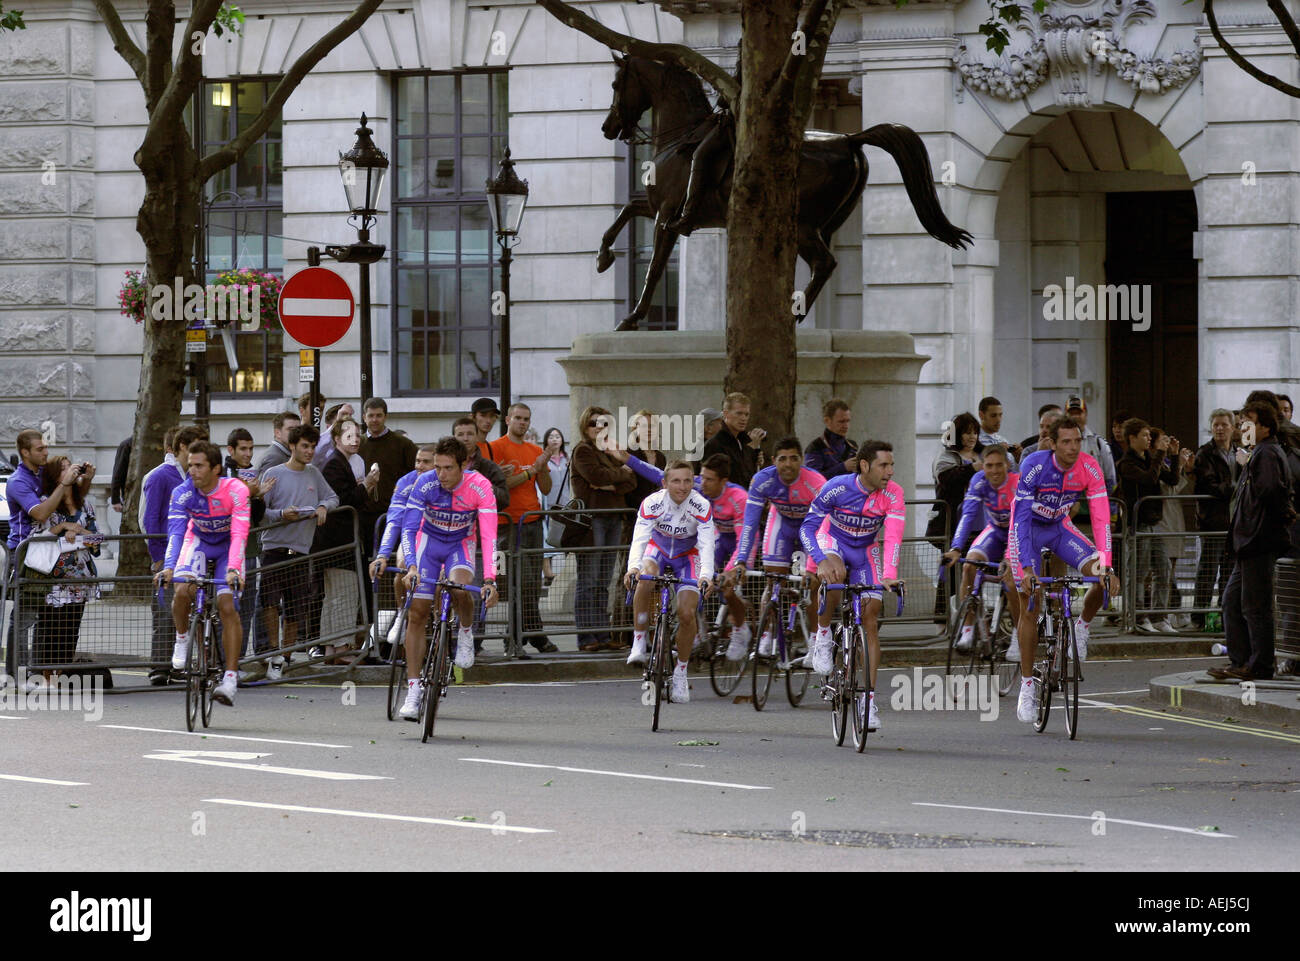 The Lampre Fondital team at the Grand Depart of the 2007 Tour De France in London Stock Photo